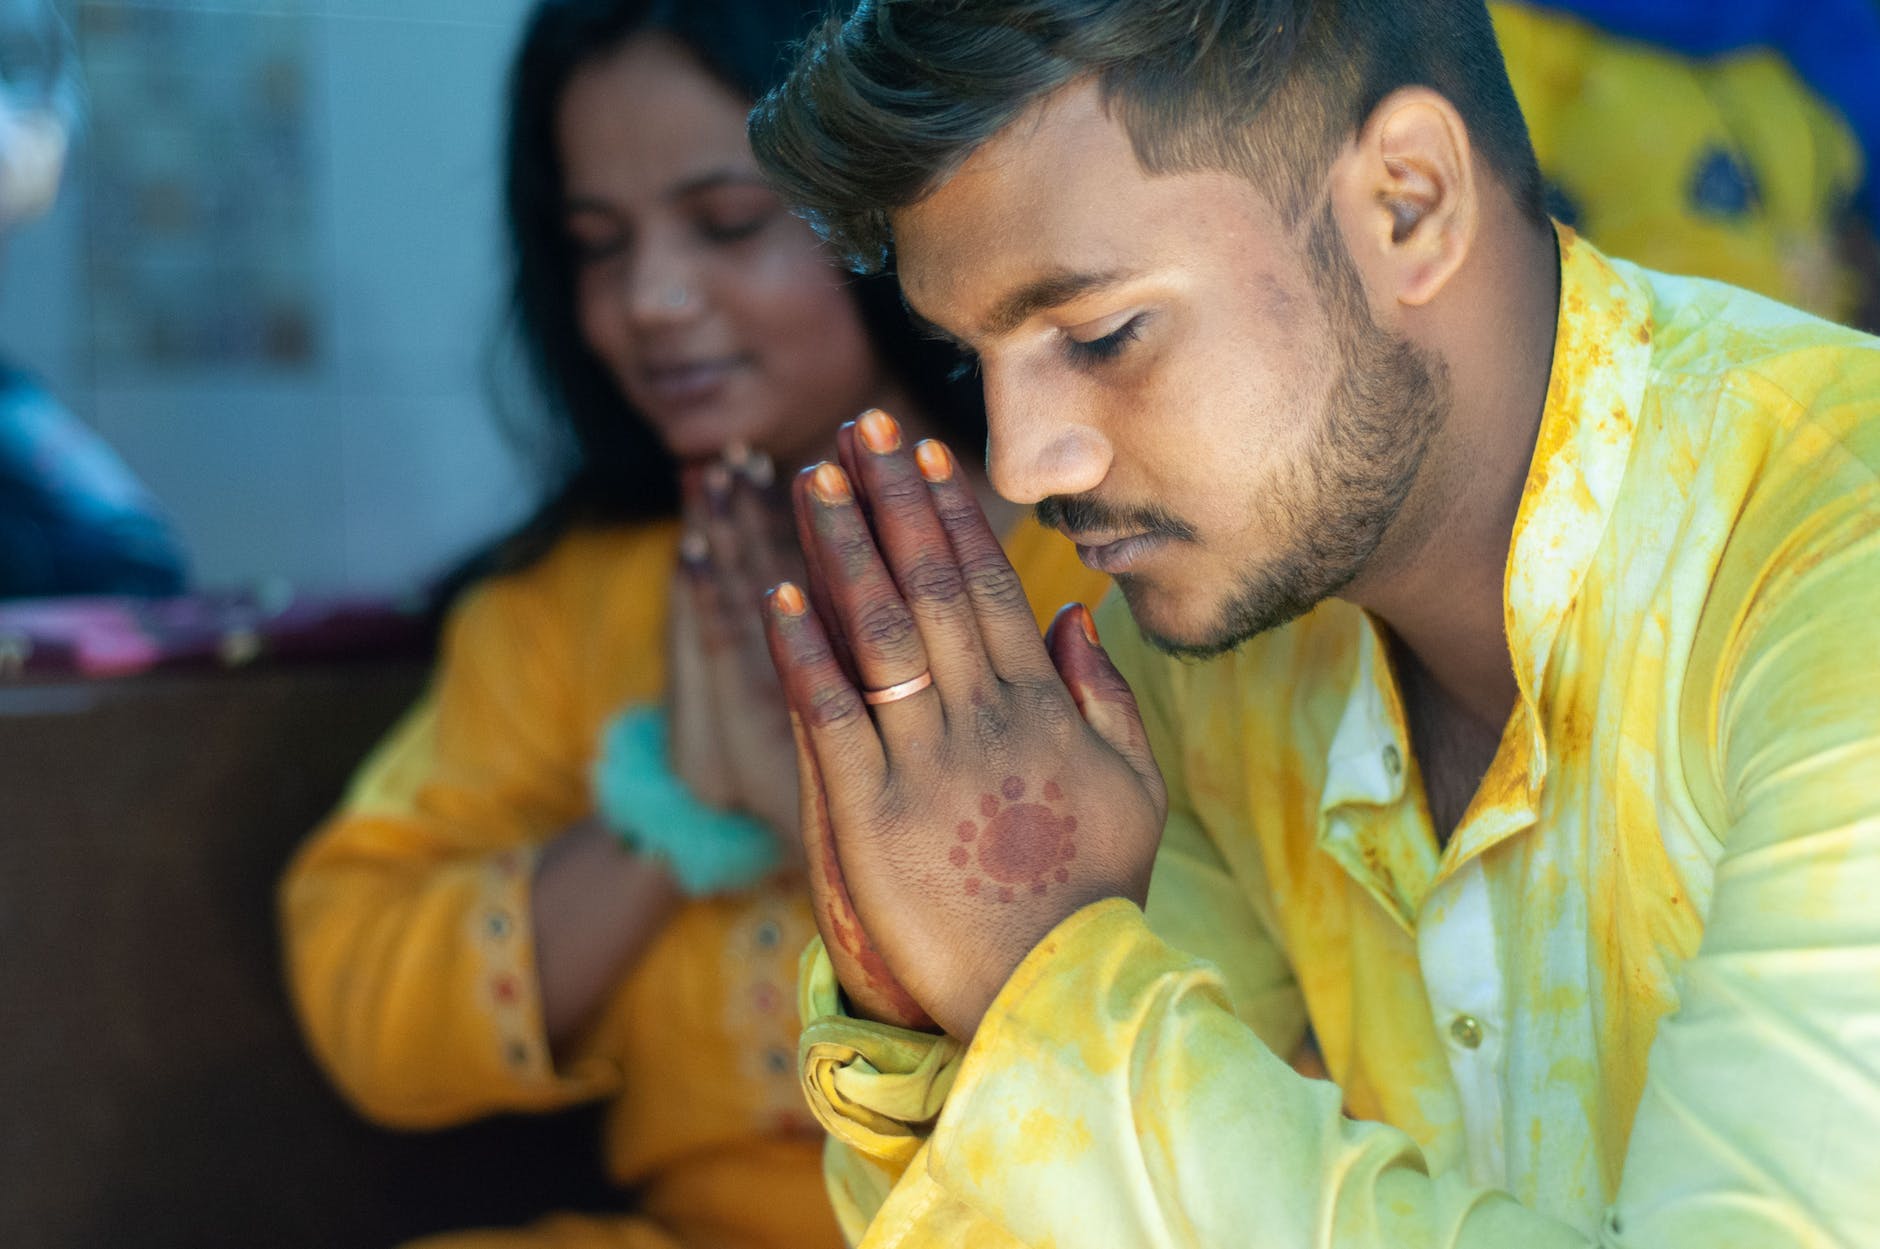 man praying with his eyes closed and hands together